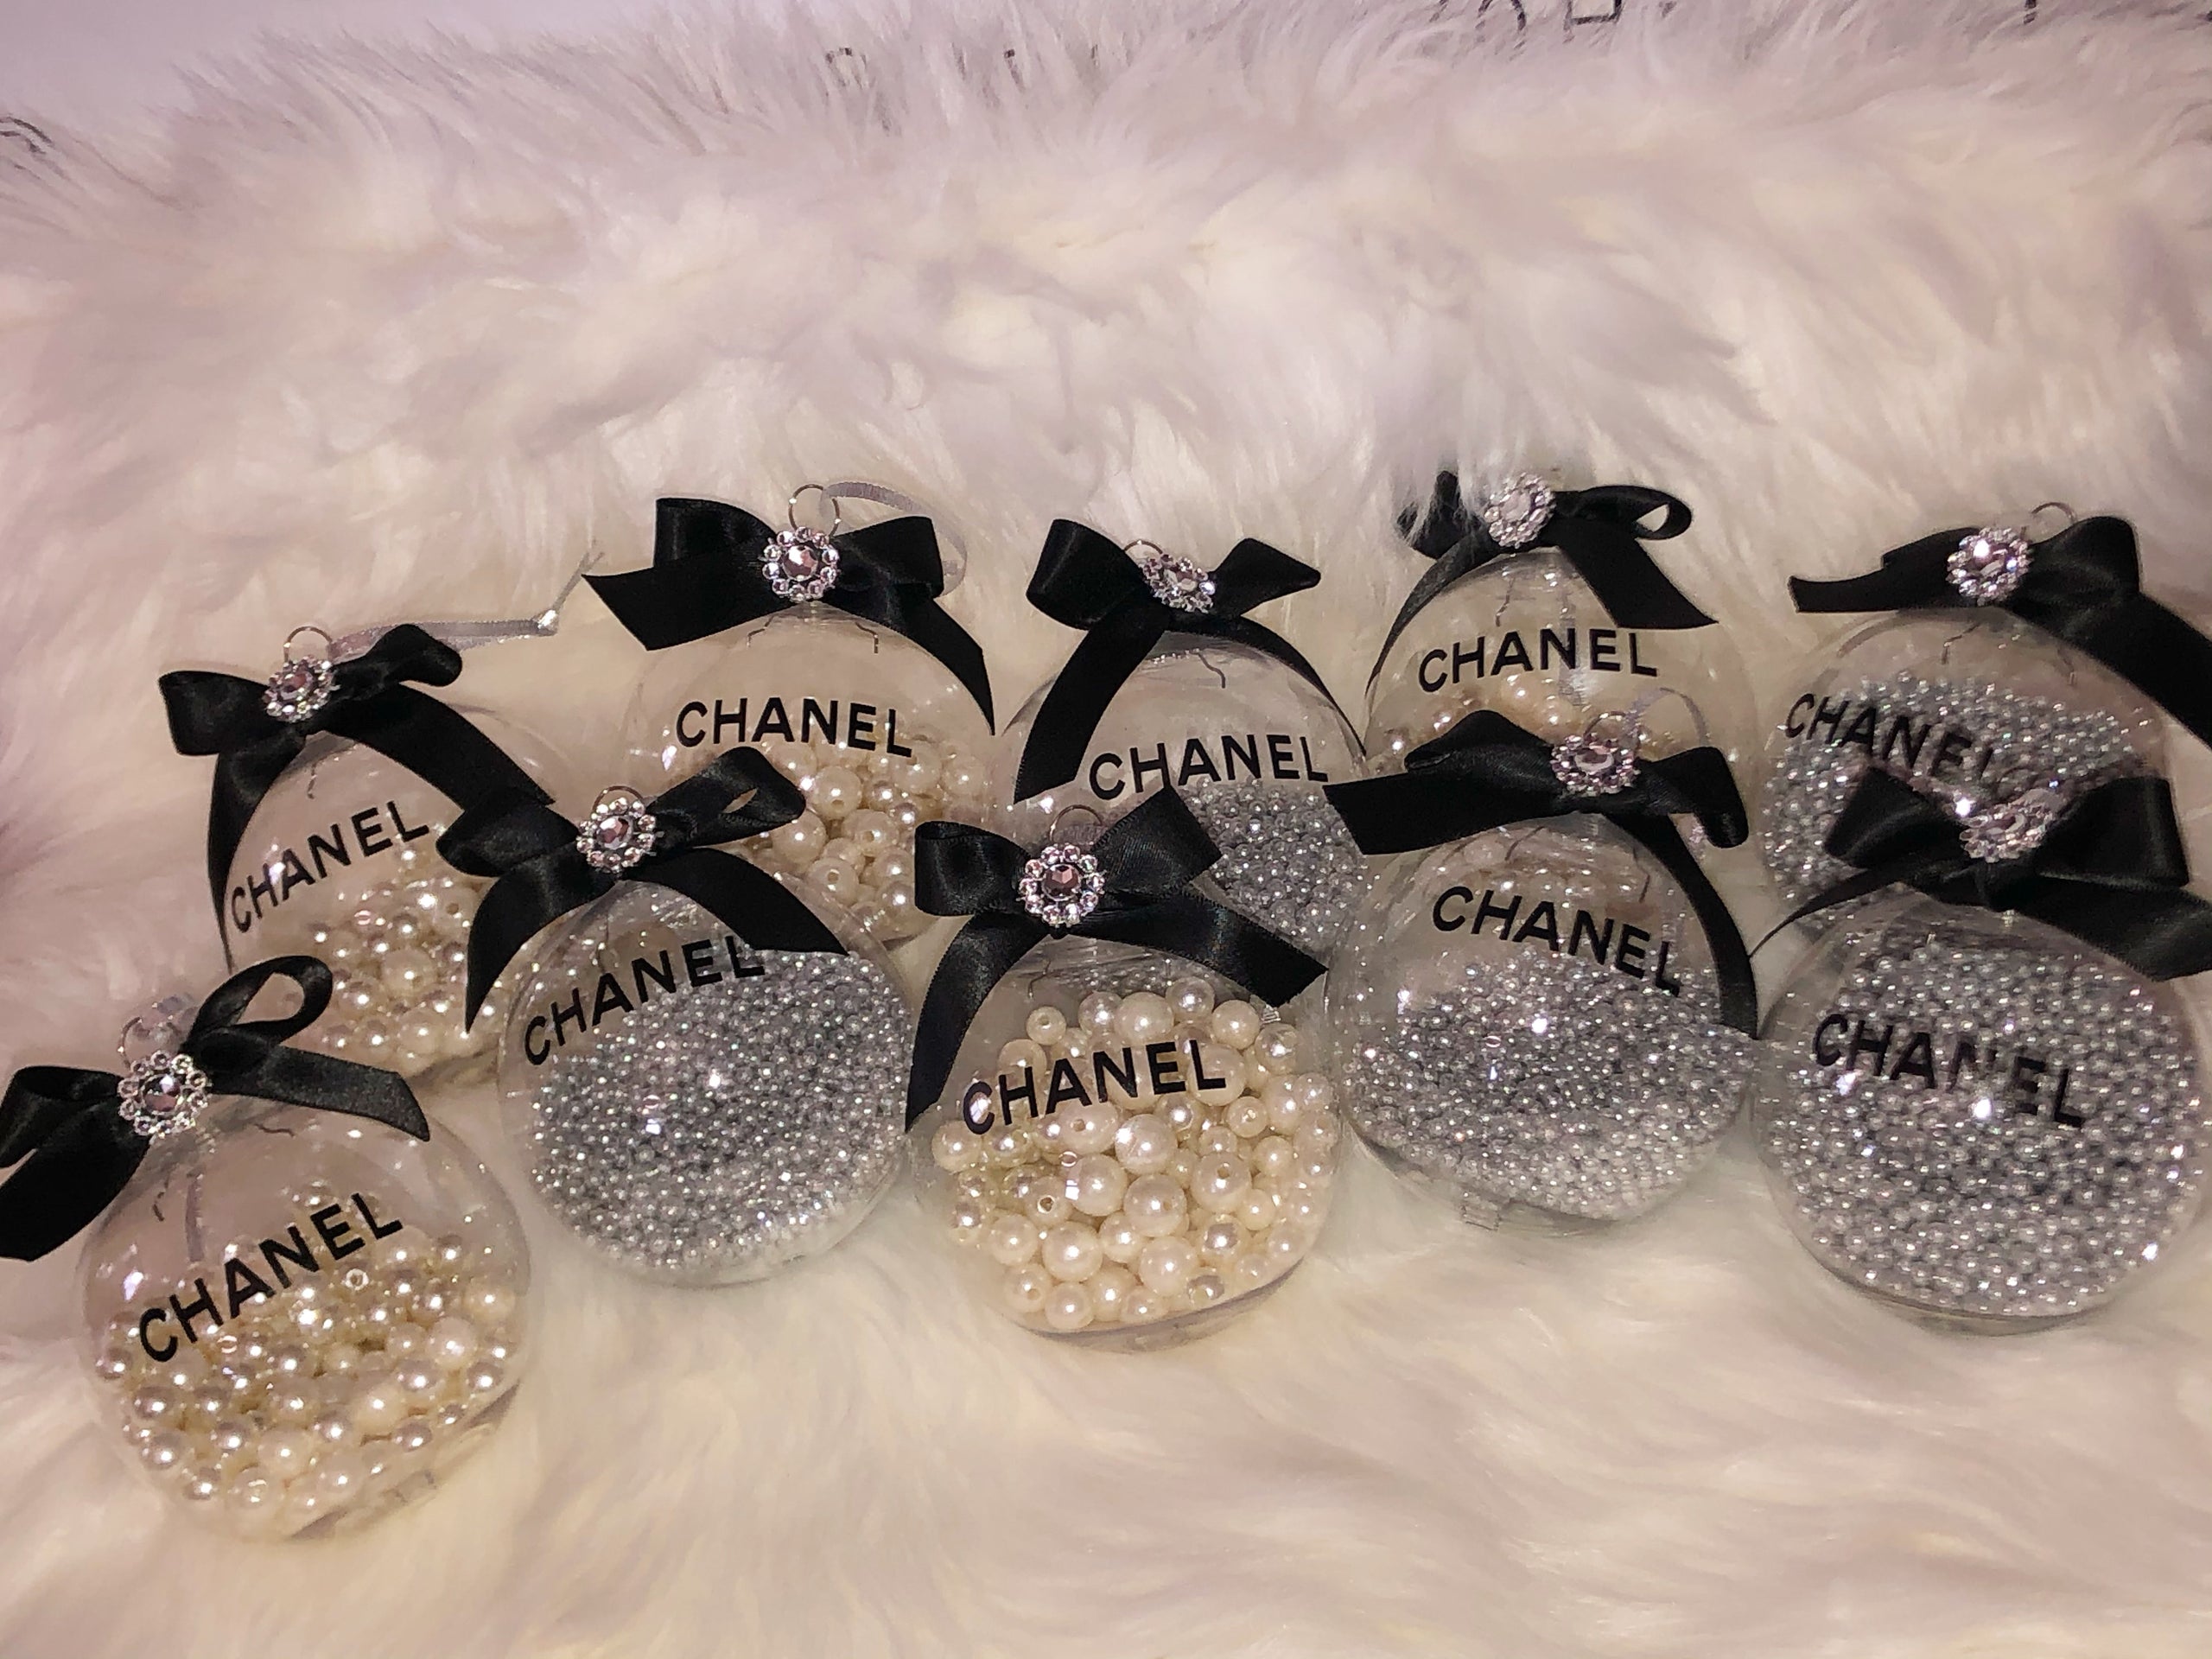 Chanel Inspired Ornaments | Shop Creations By Bri